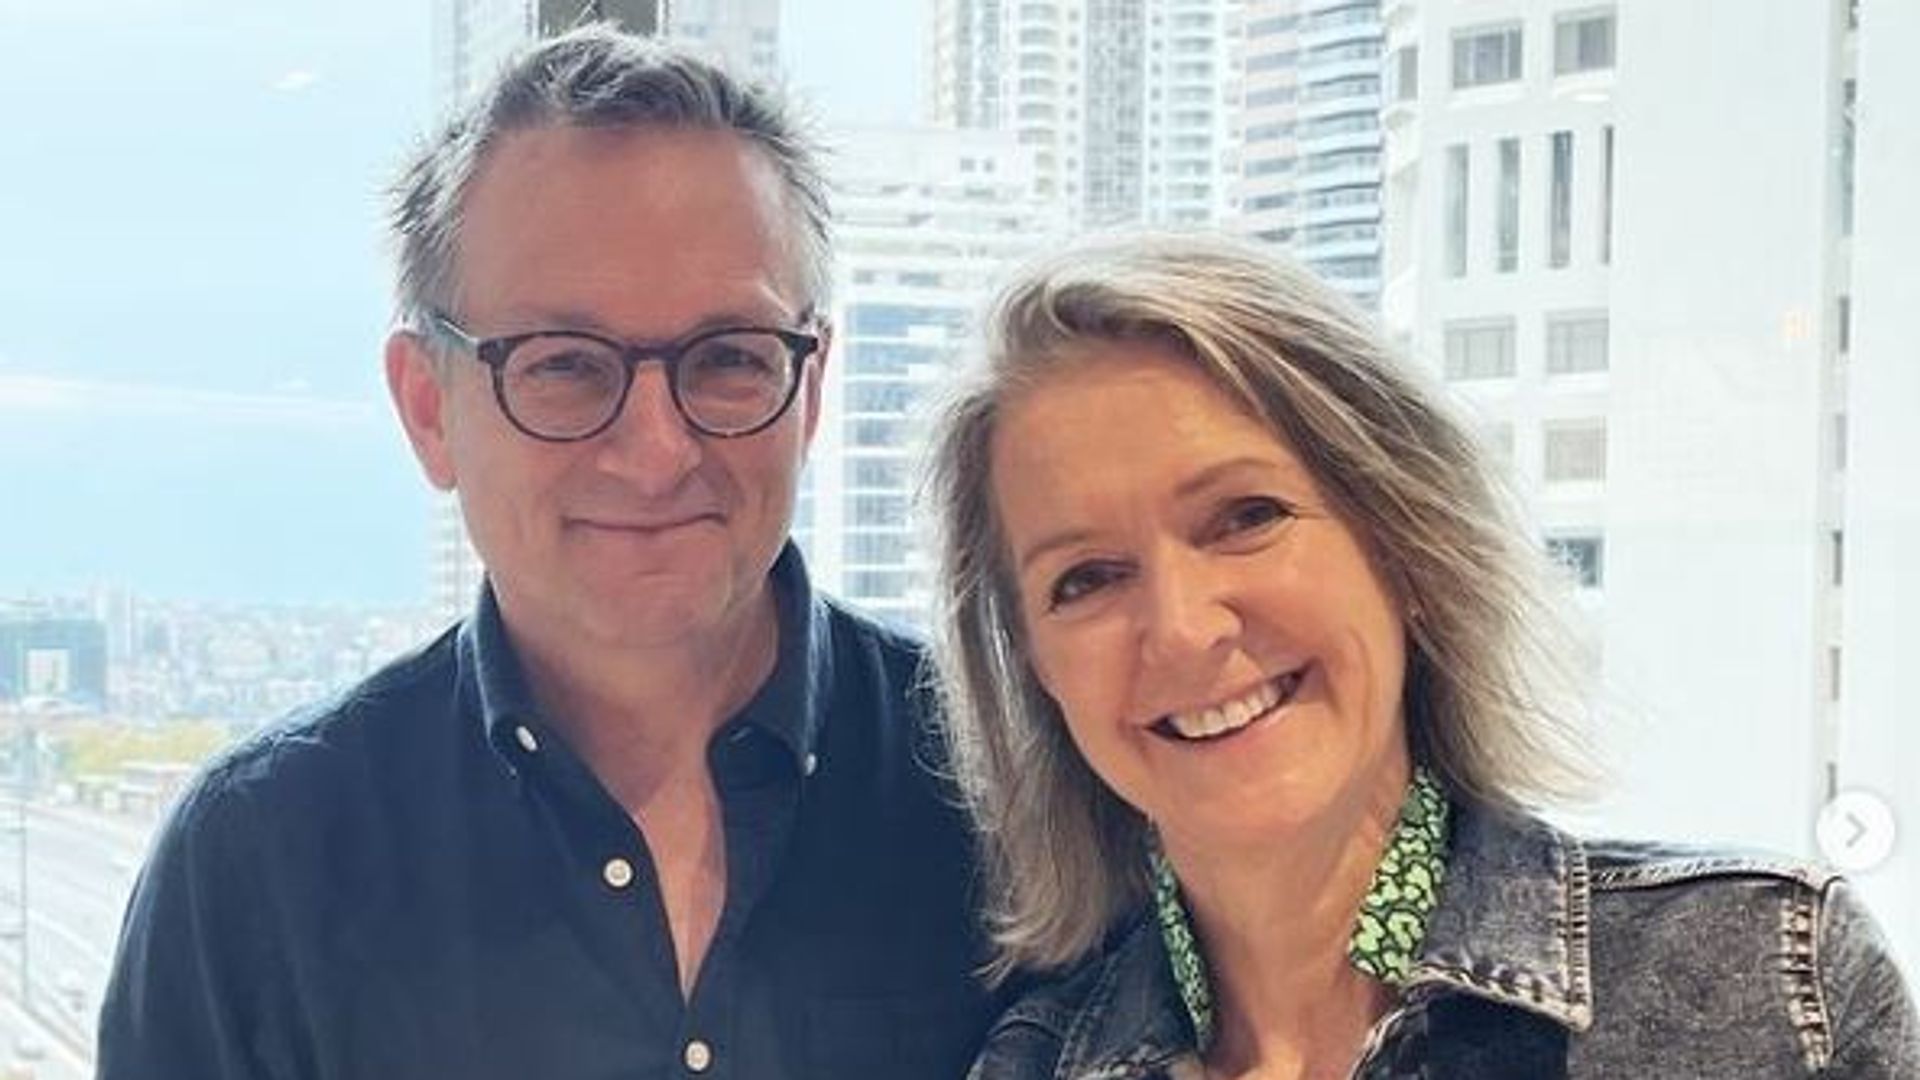 Dr Michael Mosley's widow says family are 'trying to put our lives back together' a month after his death